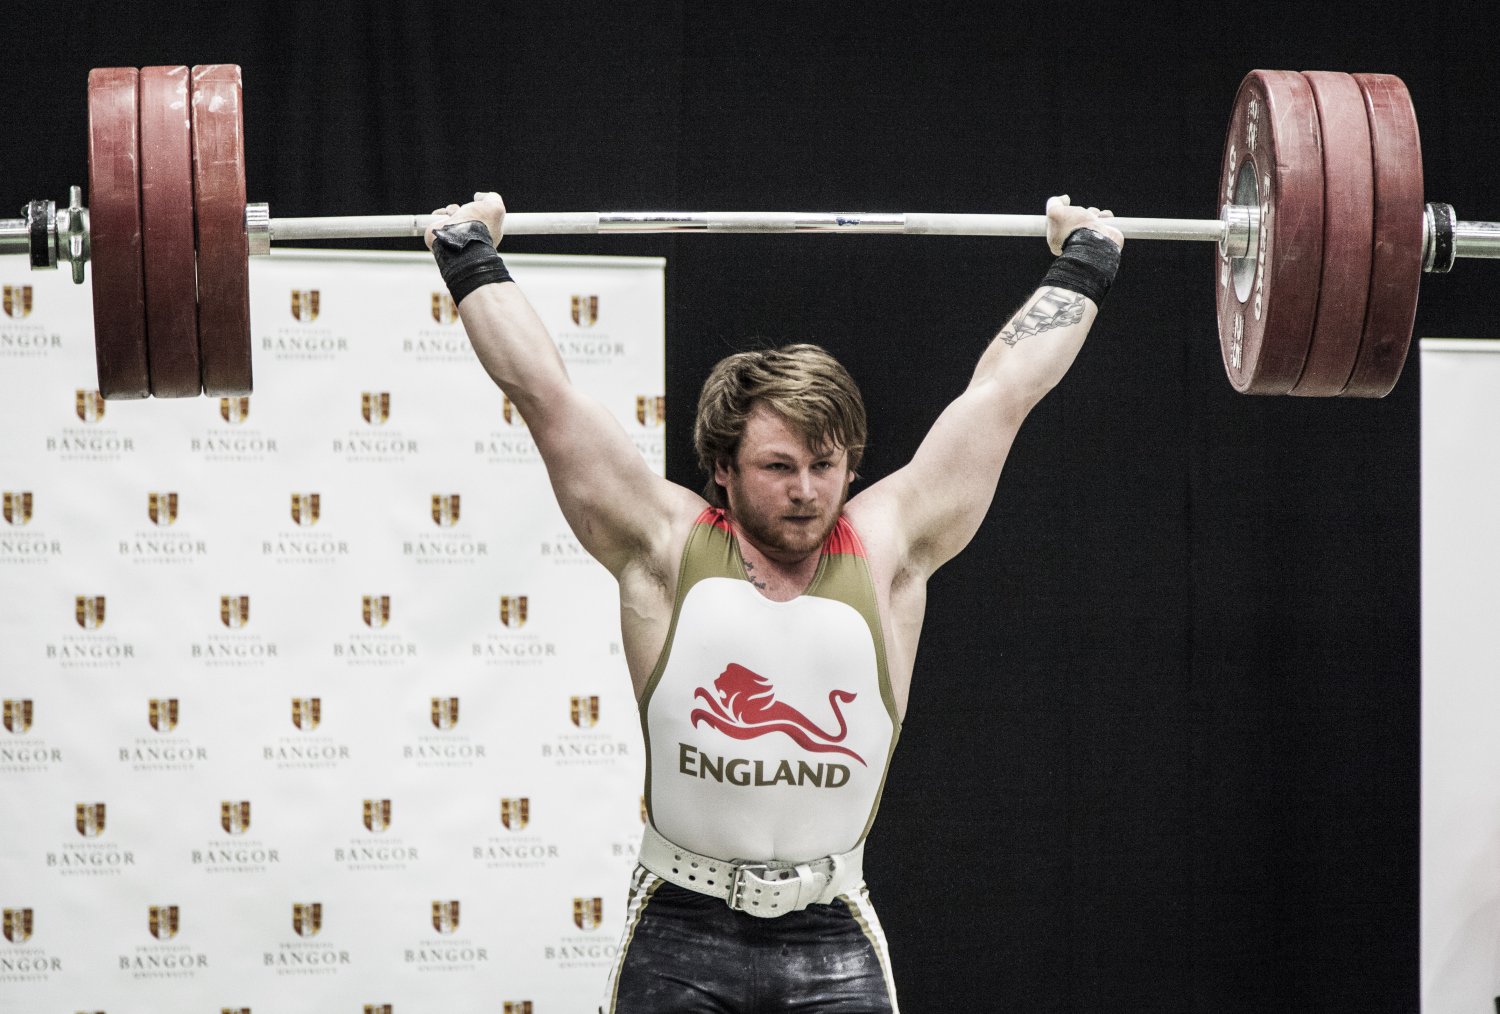 Jack Oliver picked up the 2013 Weightlifter of the Year Award ©Rebecca Andrews/BWL